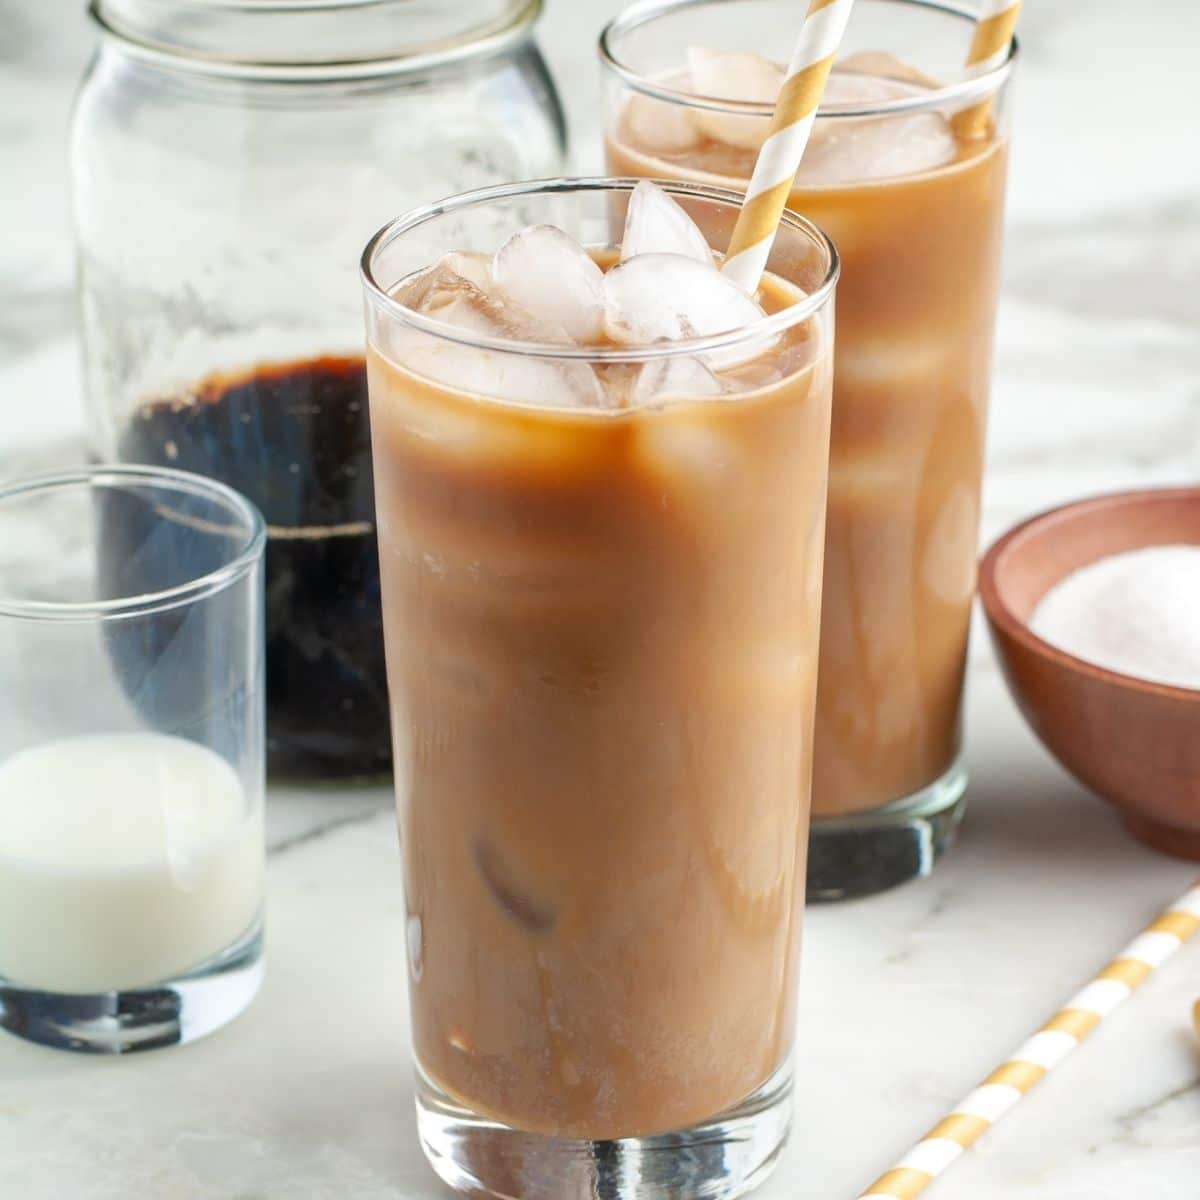 https://www.foodlovinfamily.com/wp-content/uploads/2022/04/how-to-make-iced-coffee-at-home.jpg